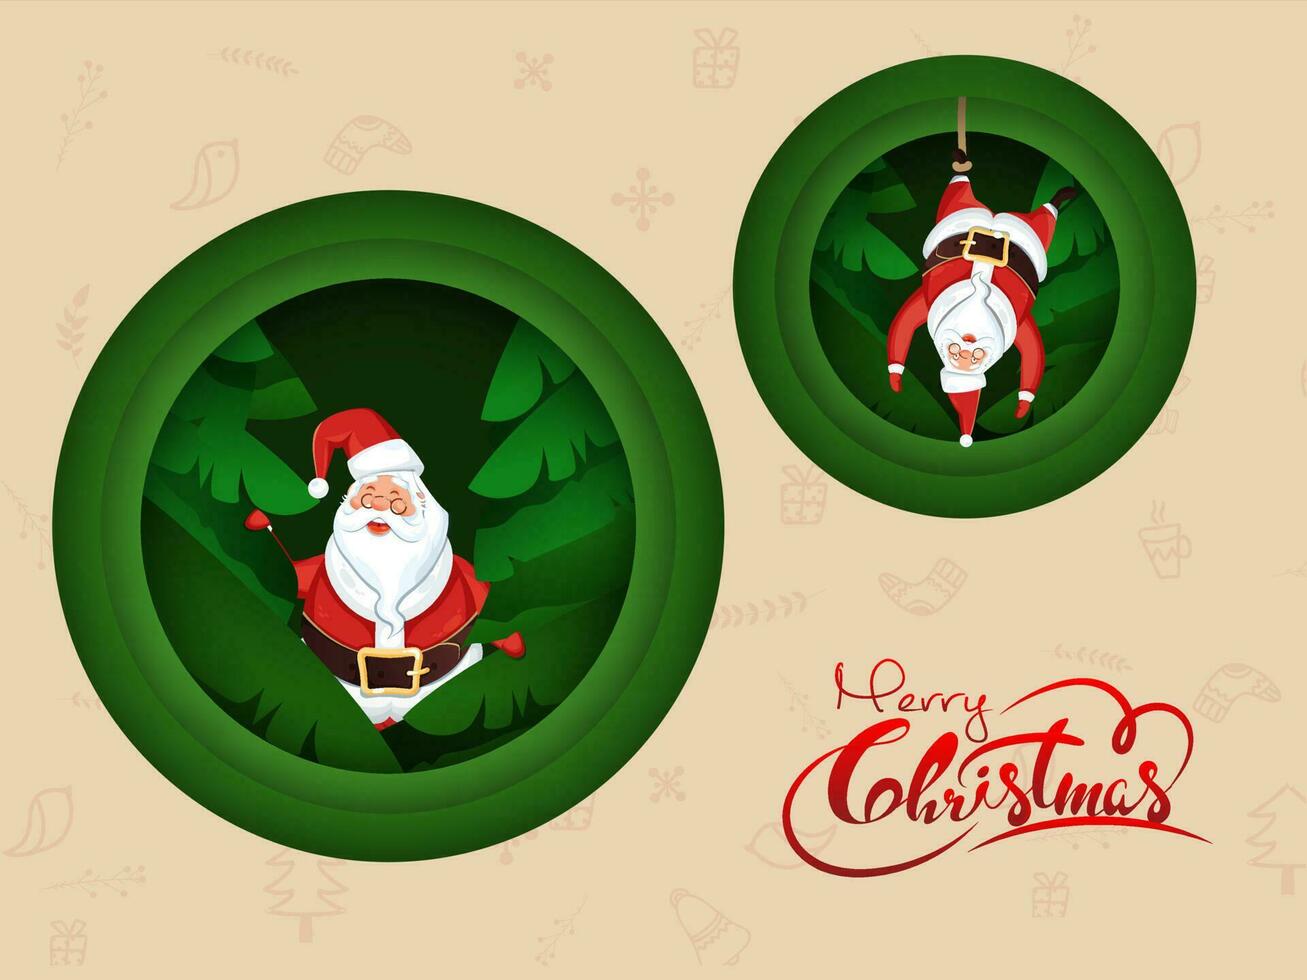 Santa Claus with Green Leaves in Paper Cut Circular Shape on Xmas Festival Elements Beige Background for Merry Christmas Celebration. vector